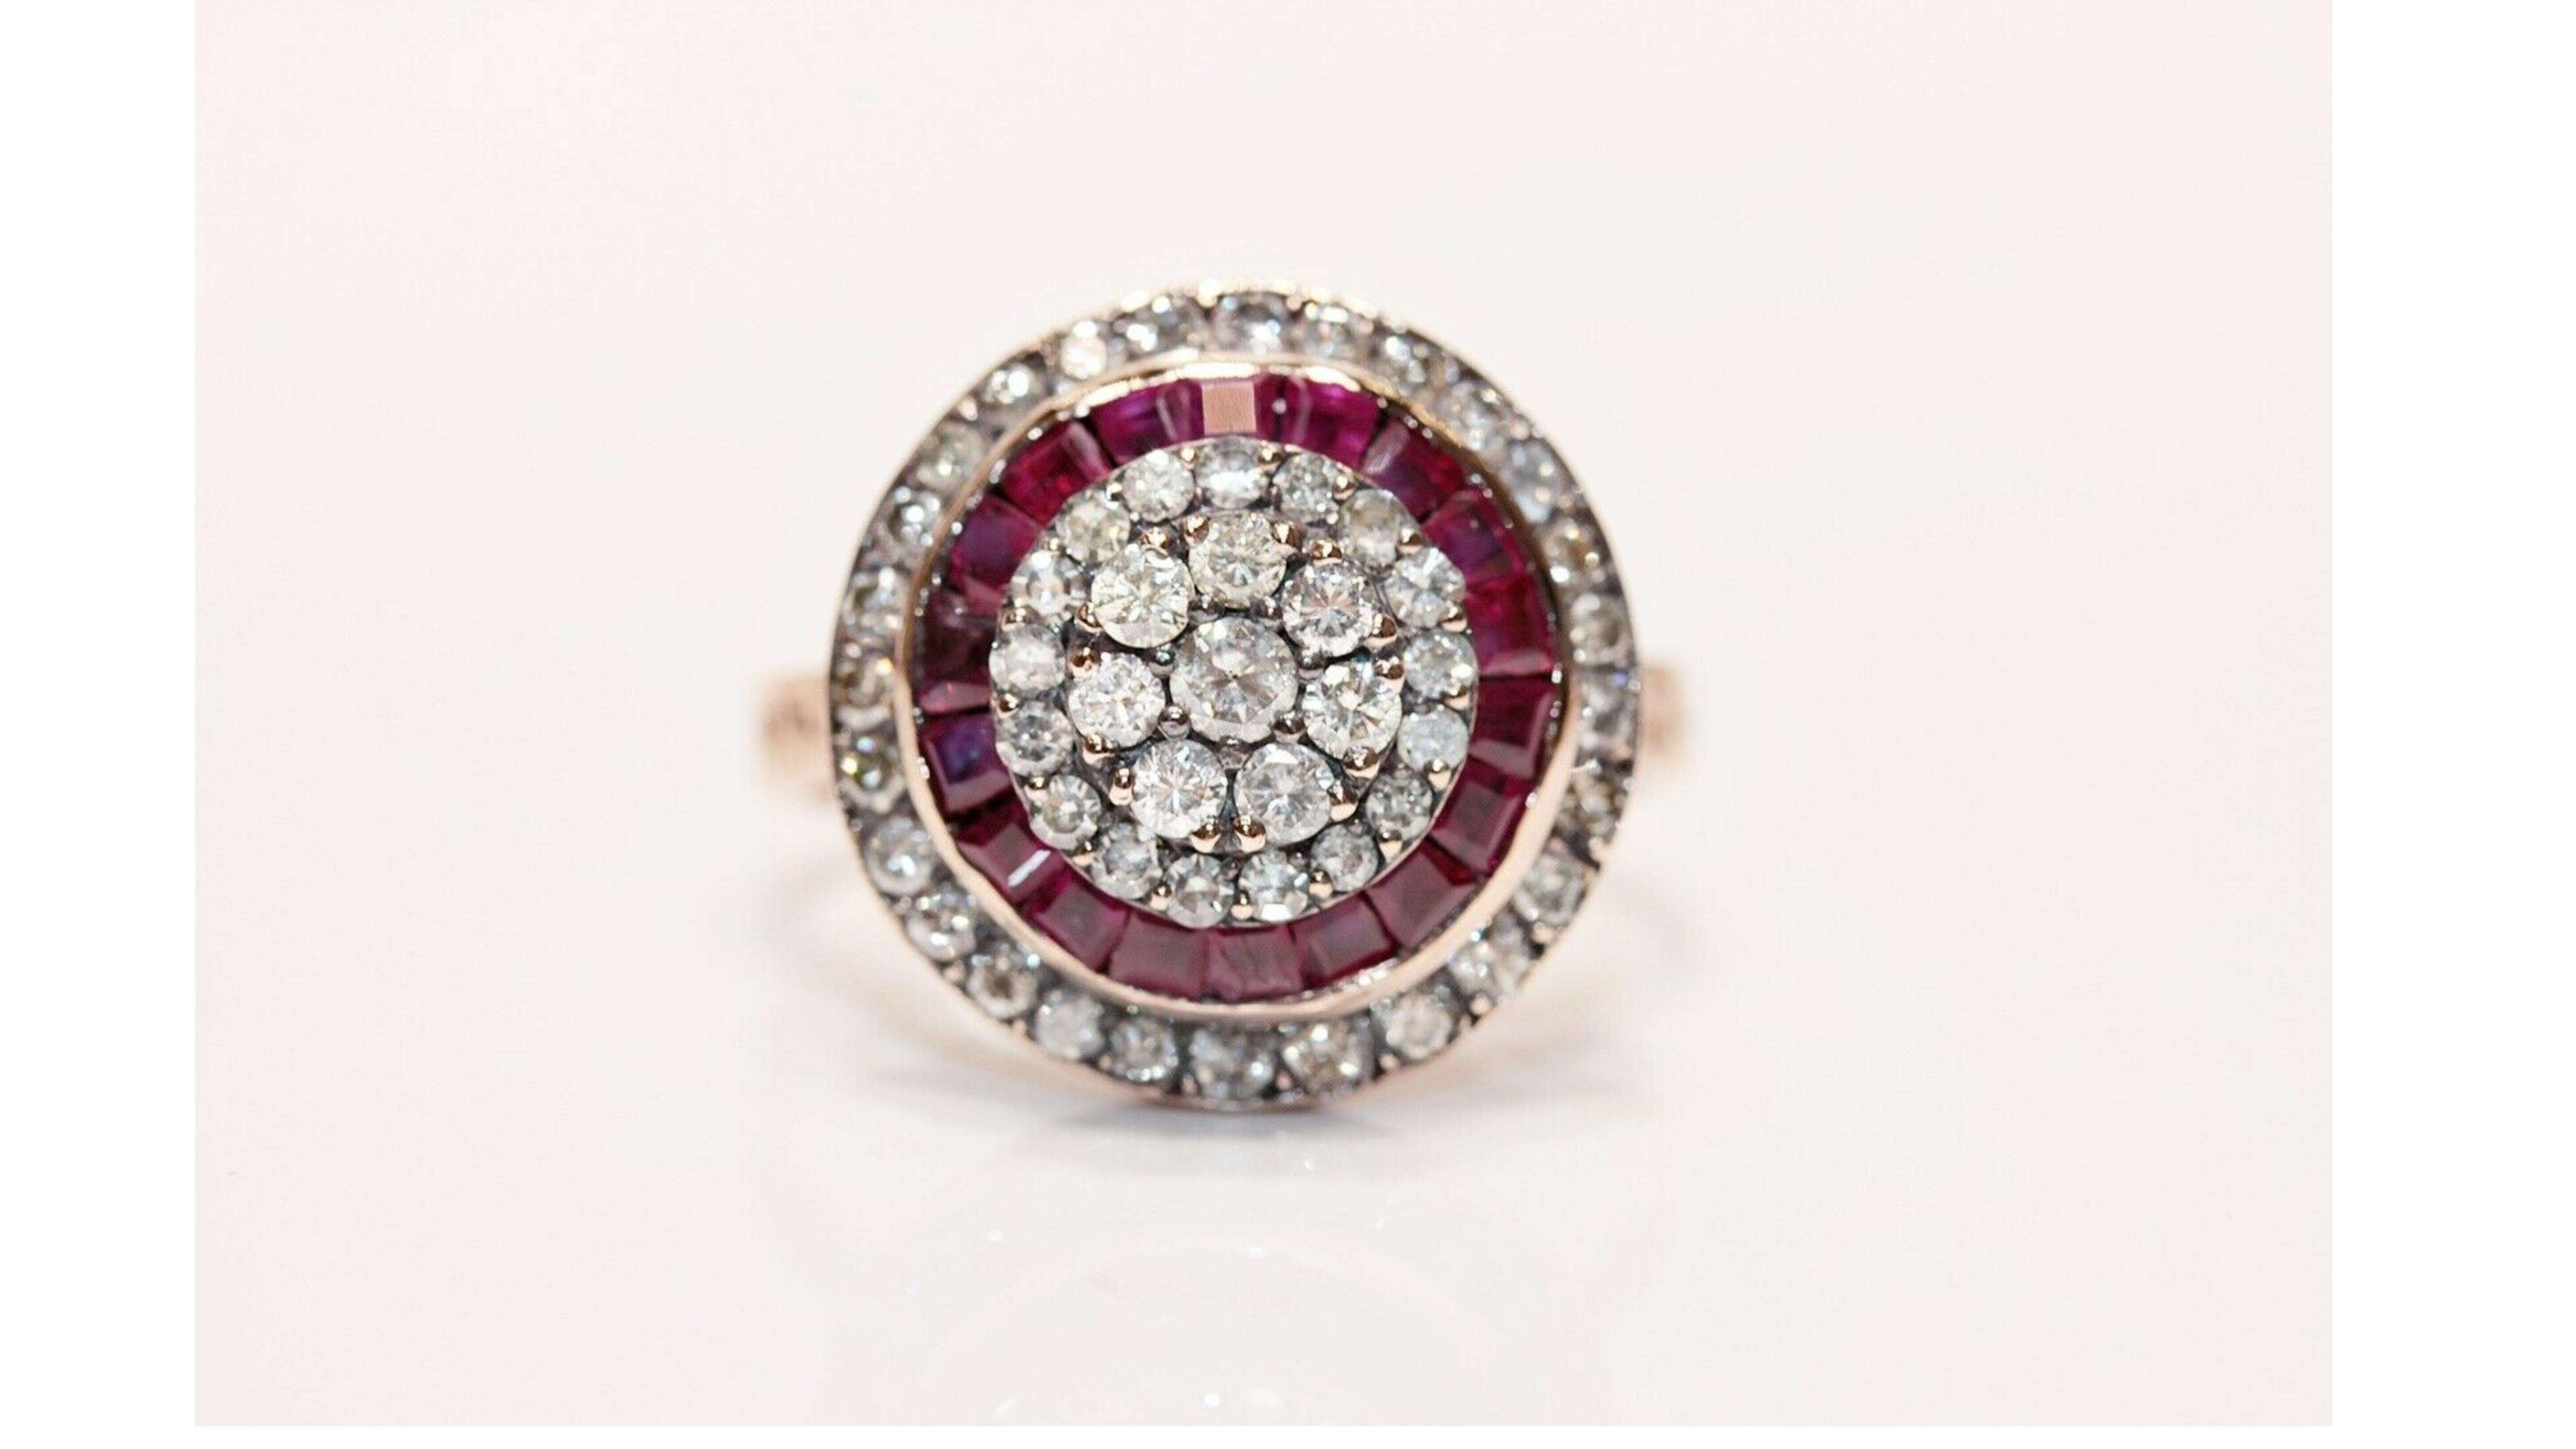 Art Deco Style  Ruby Diamond Ring 8 Karat White Gold  and with  10 Ruby stones and 10 White Diamonds at 0.90 carats set in 14 Karat White Gold. Its in a Rose Cut shape too and stands out. with the 1.50 Carat Ruby.










Ruby 0.65ct 
Diamond 0.30